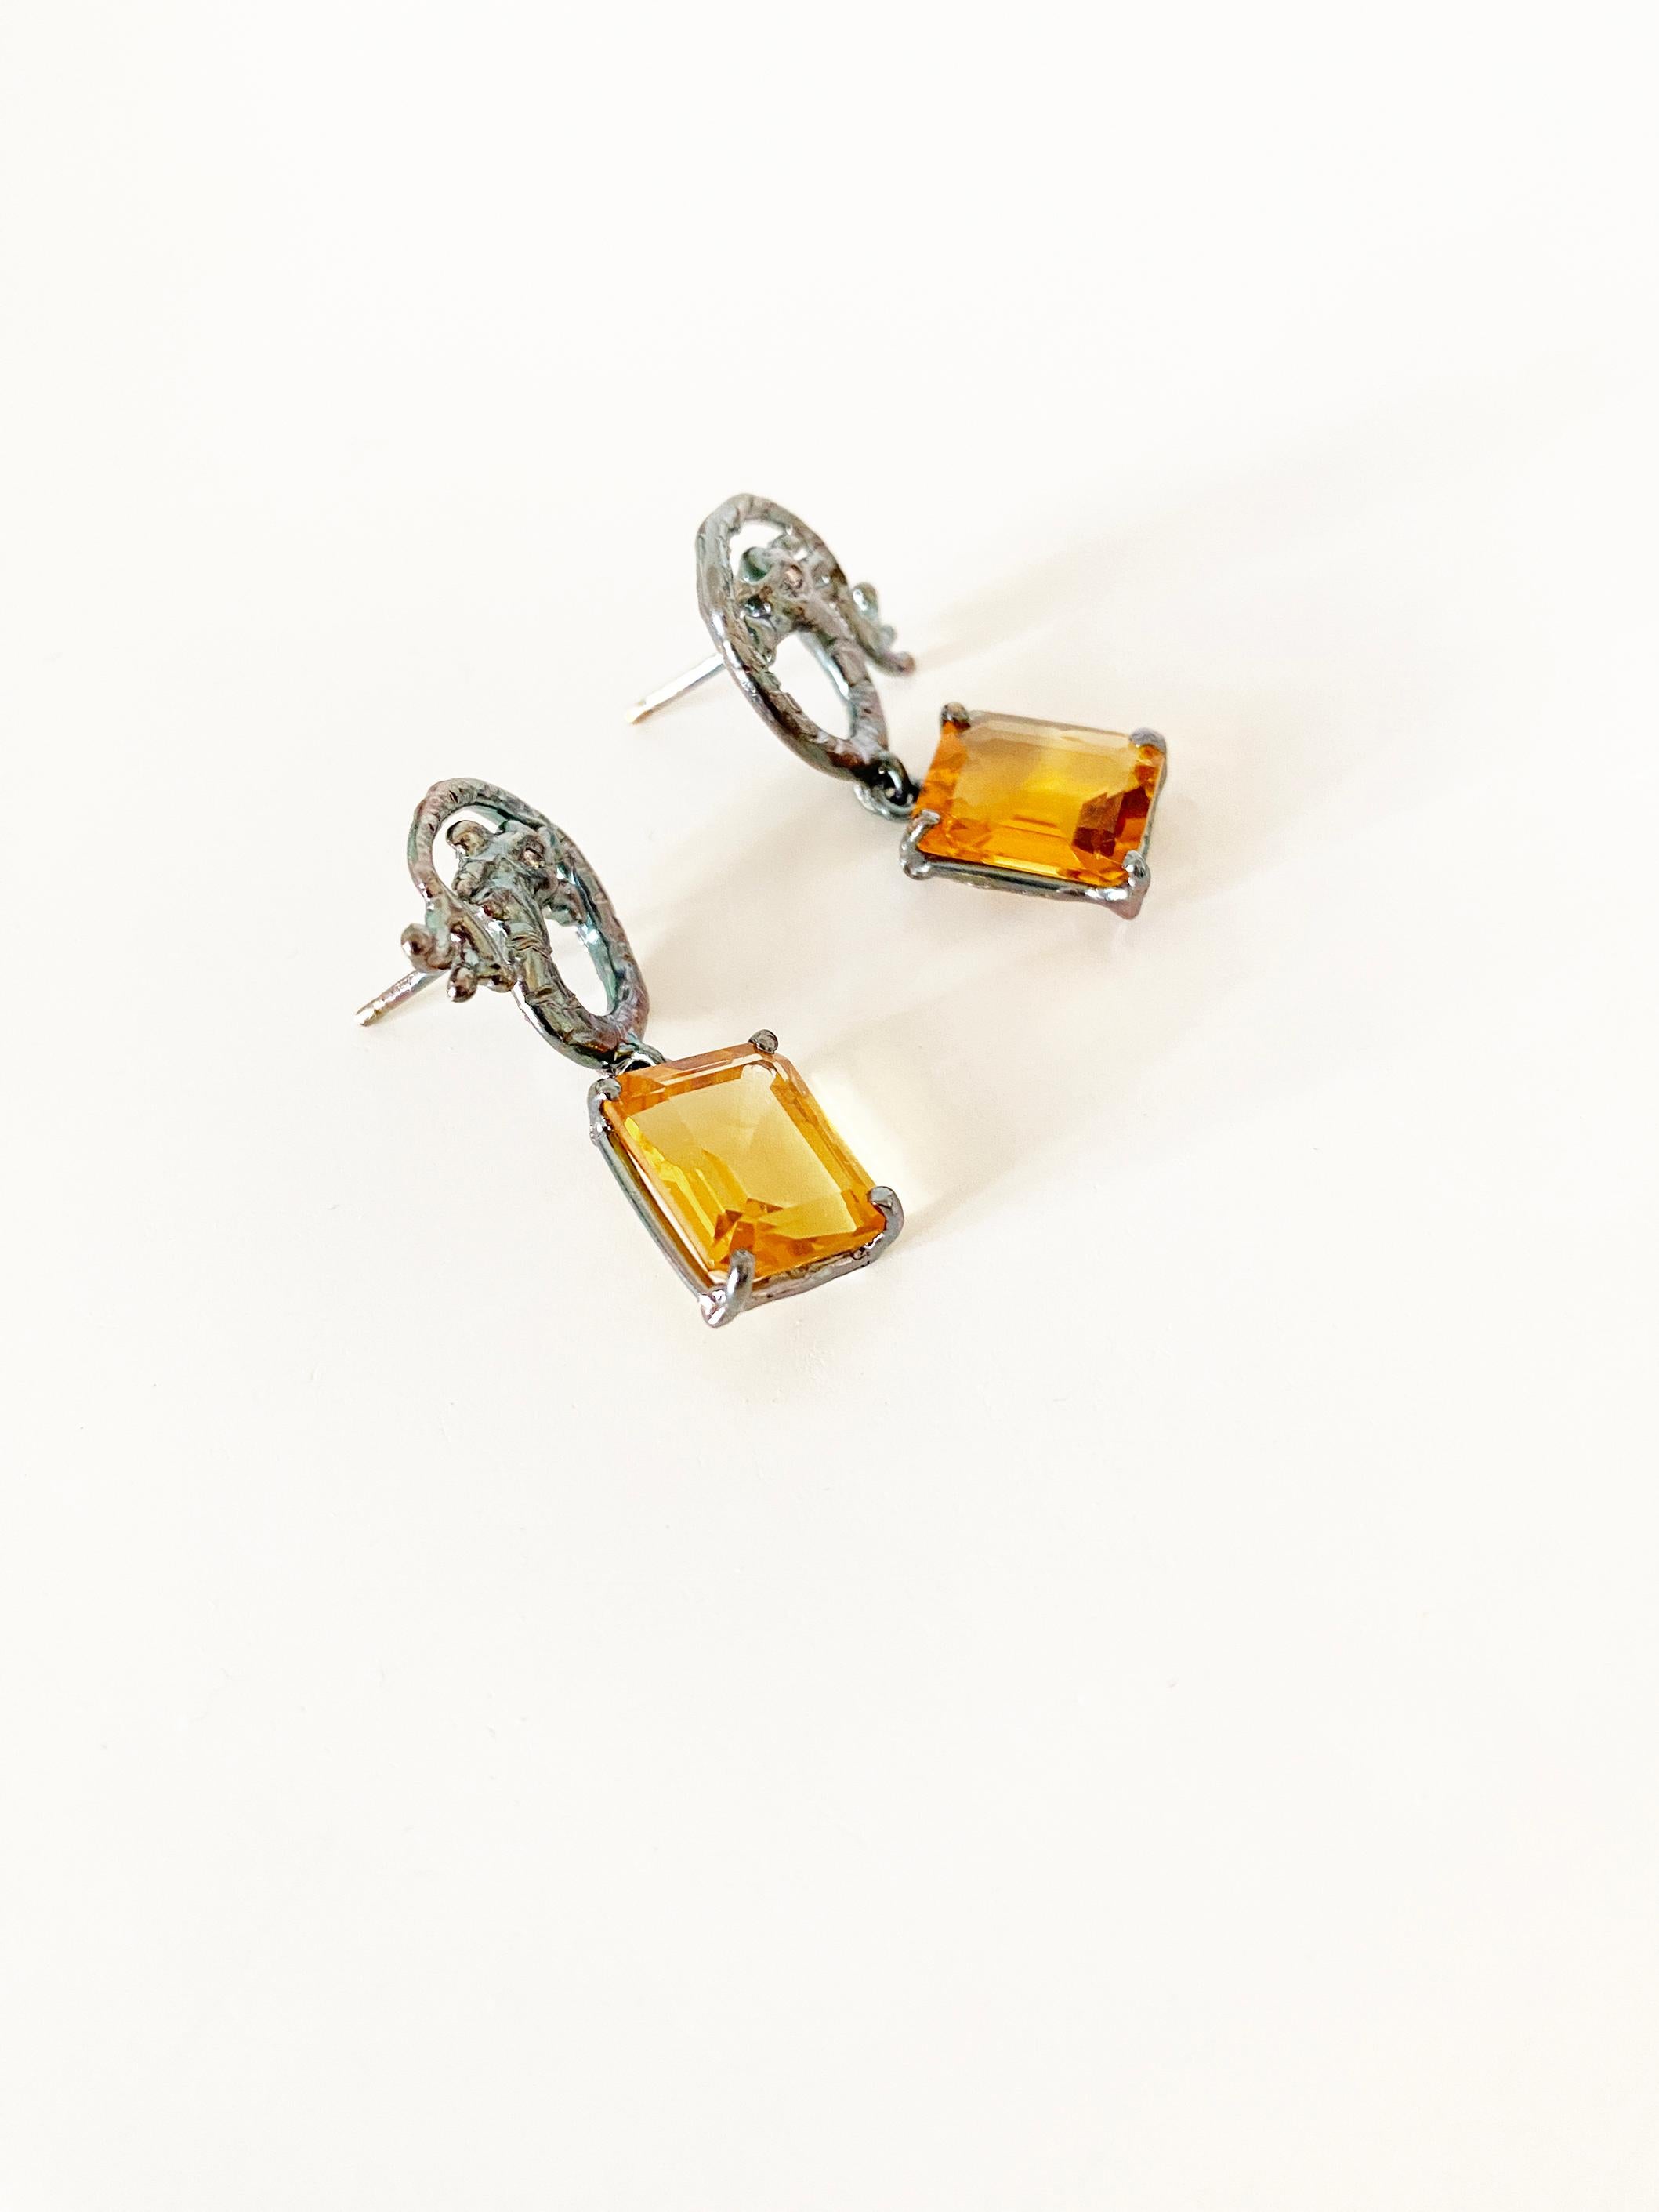 Rock Dragon Rossella Ugolini Burnished Sterling Silver Diamonds Citrine Earrings In New Condition For Sale In Rome, IT